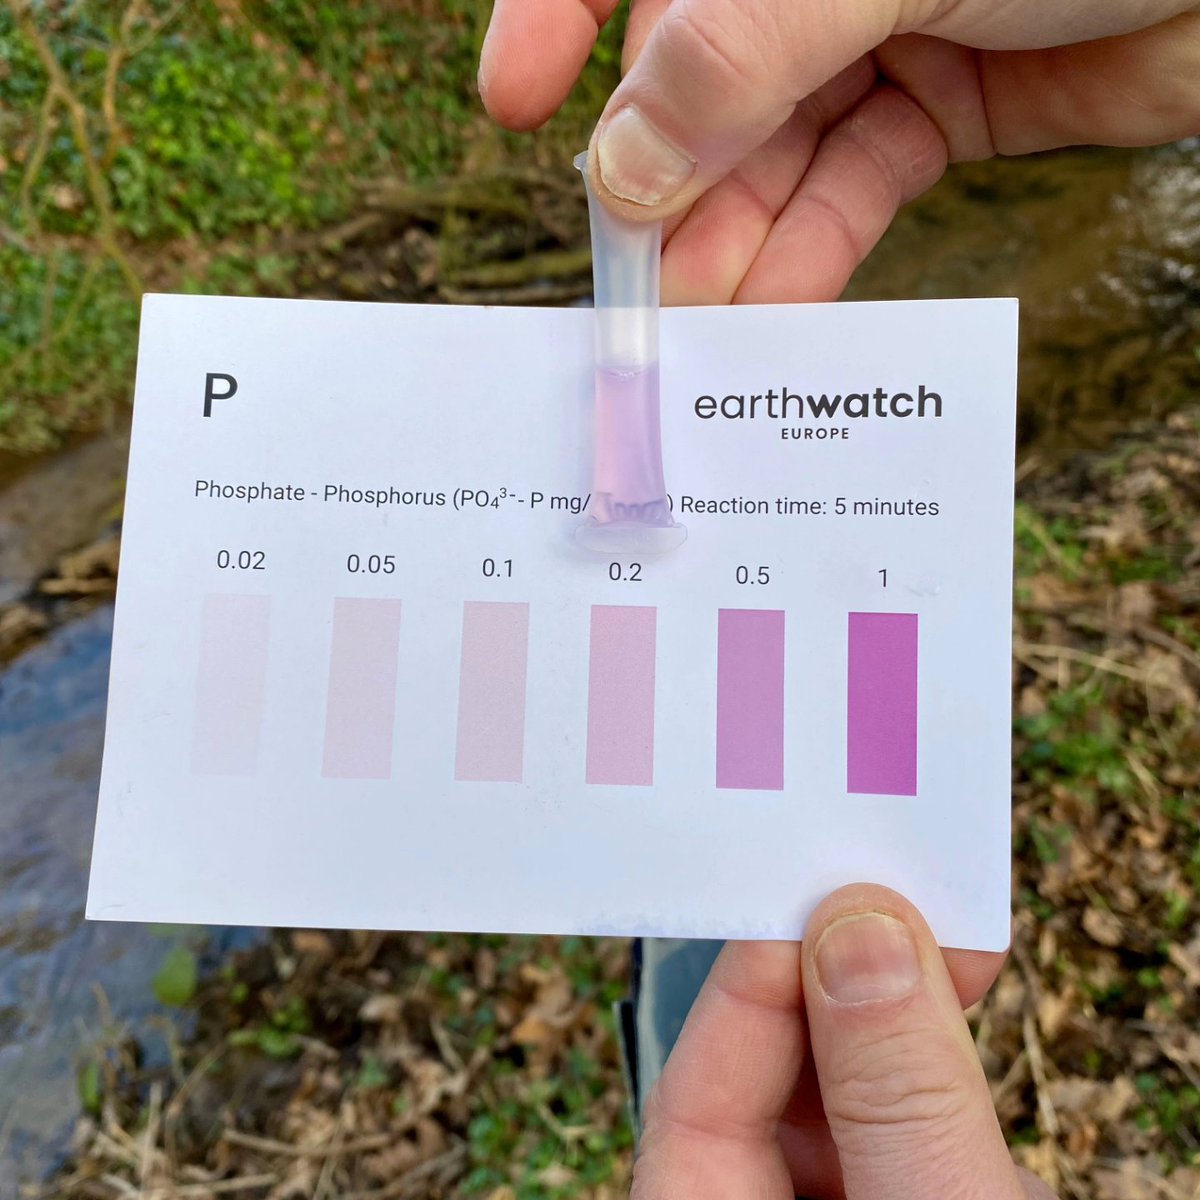 Out with a few locals today testing the water quality in Hanwell Brook. We found high levels of phosphate & the highest level of nitrates

14yrs of the Tories in power has only made our waterways a lot dirtier 💩

#EndSewagePollution #TogetherForRivers #ThamesWater #SewageScandal